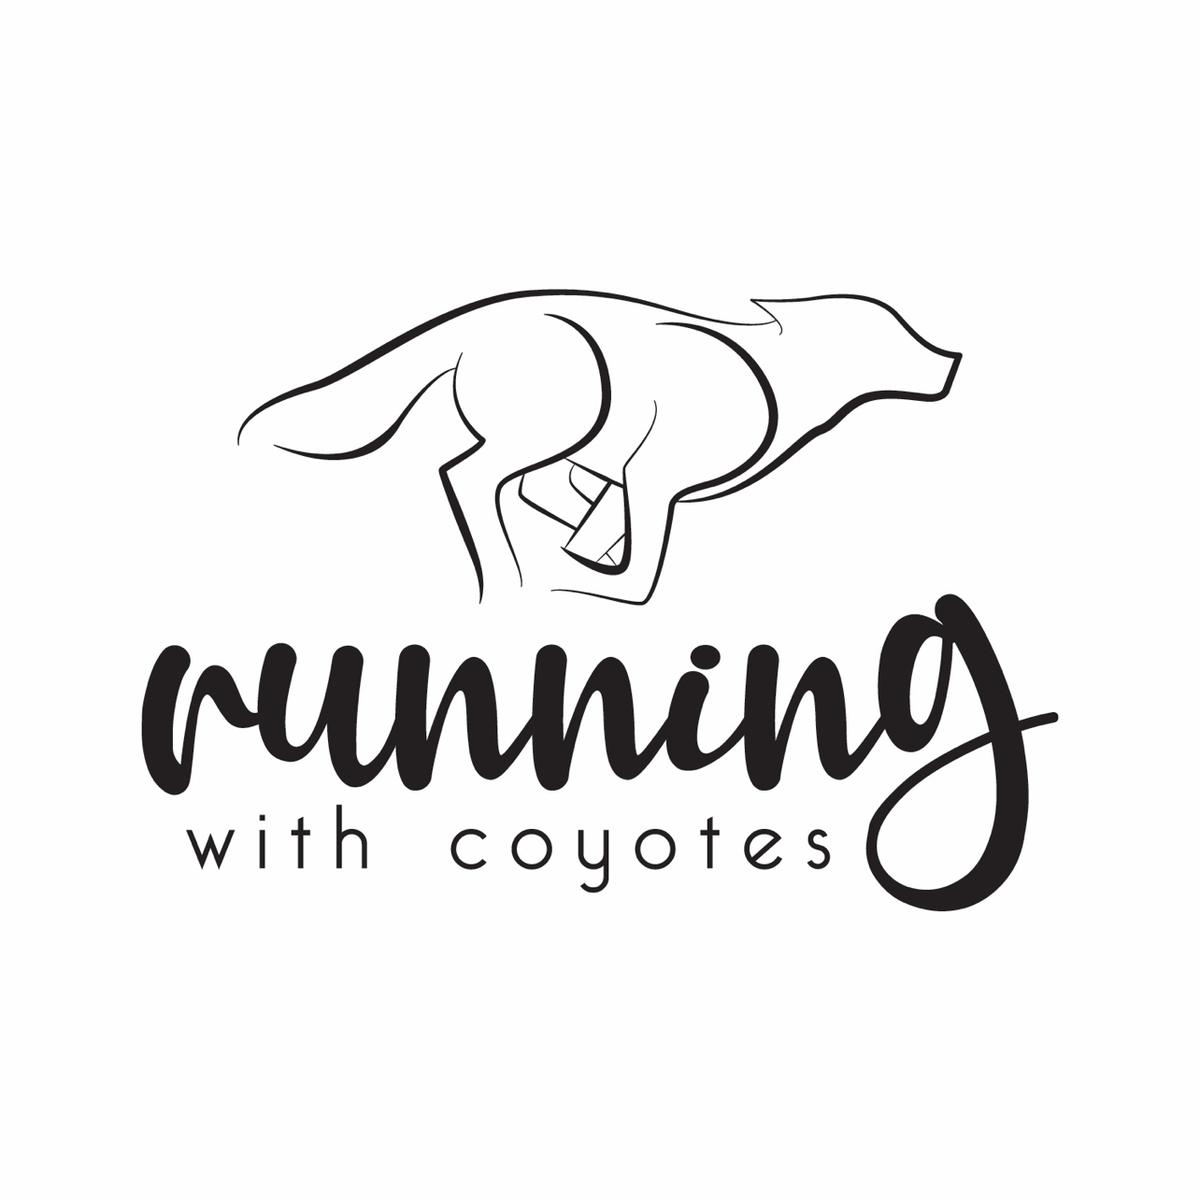 RunWithCoyotes's images